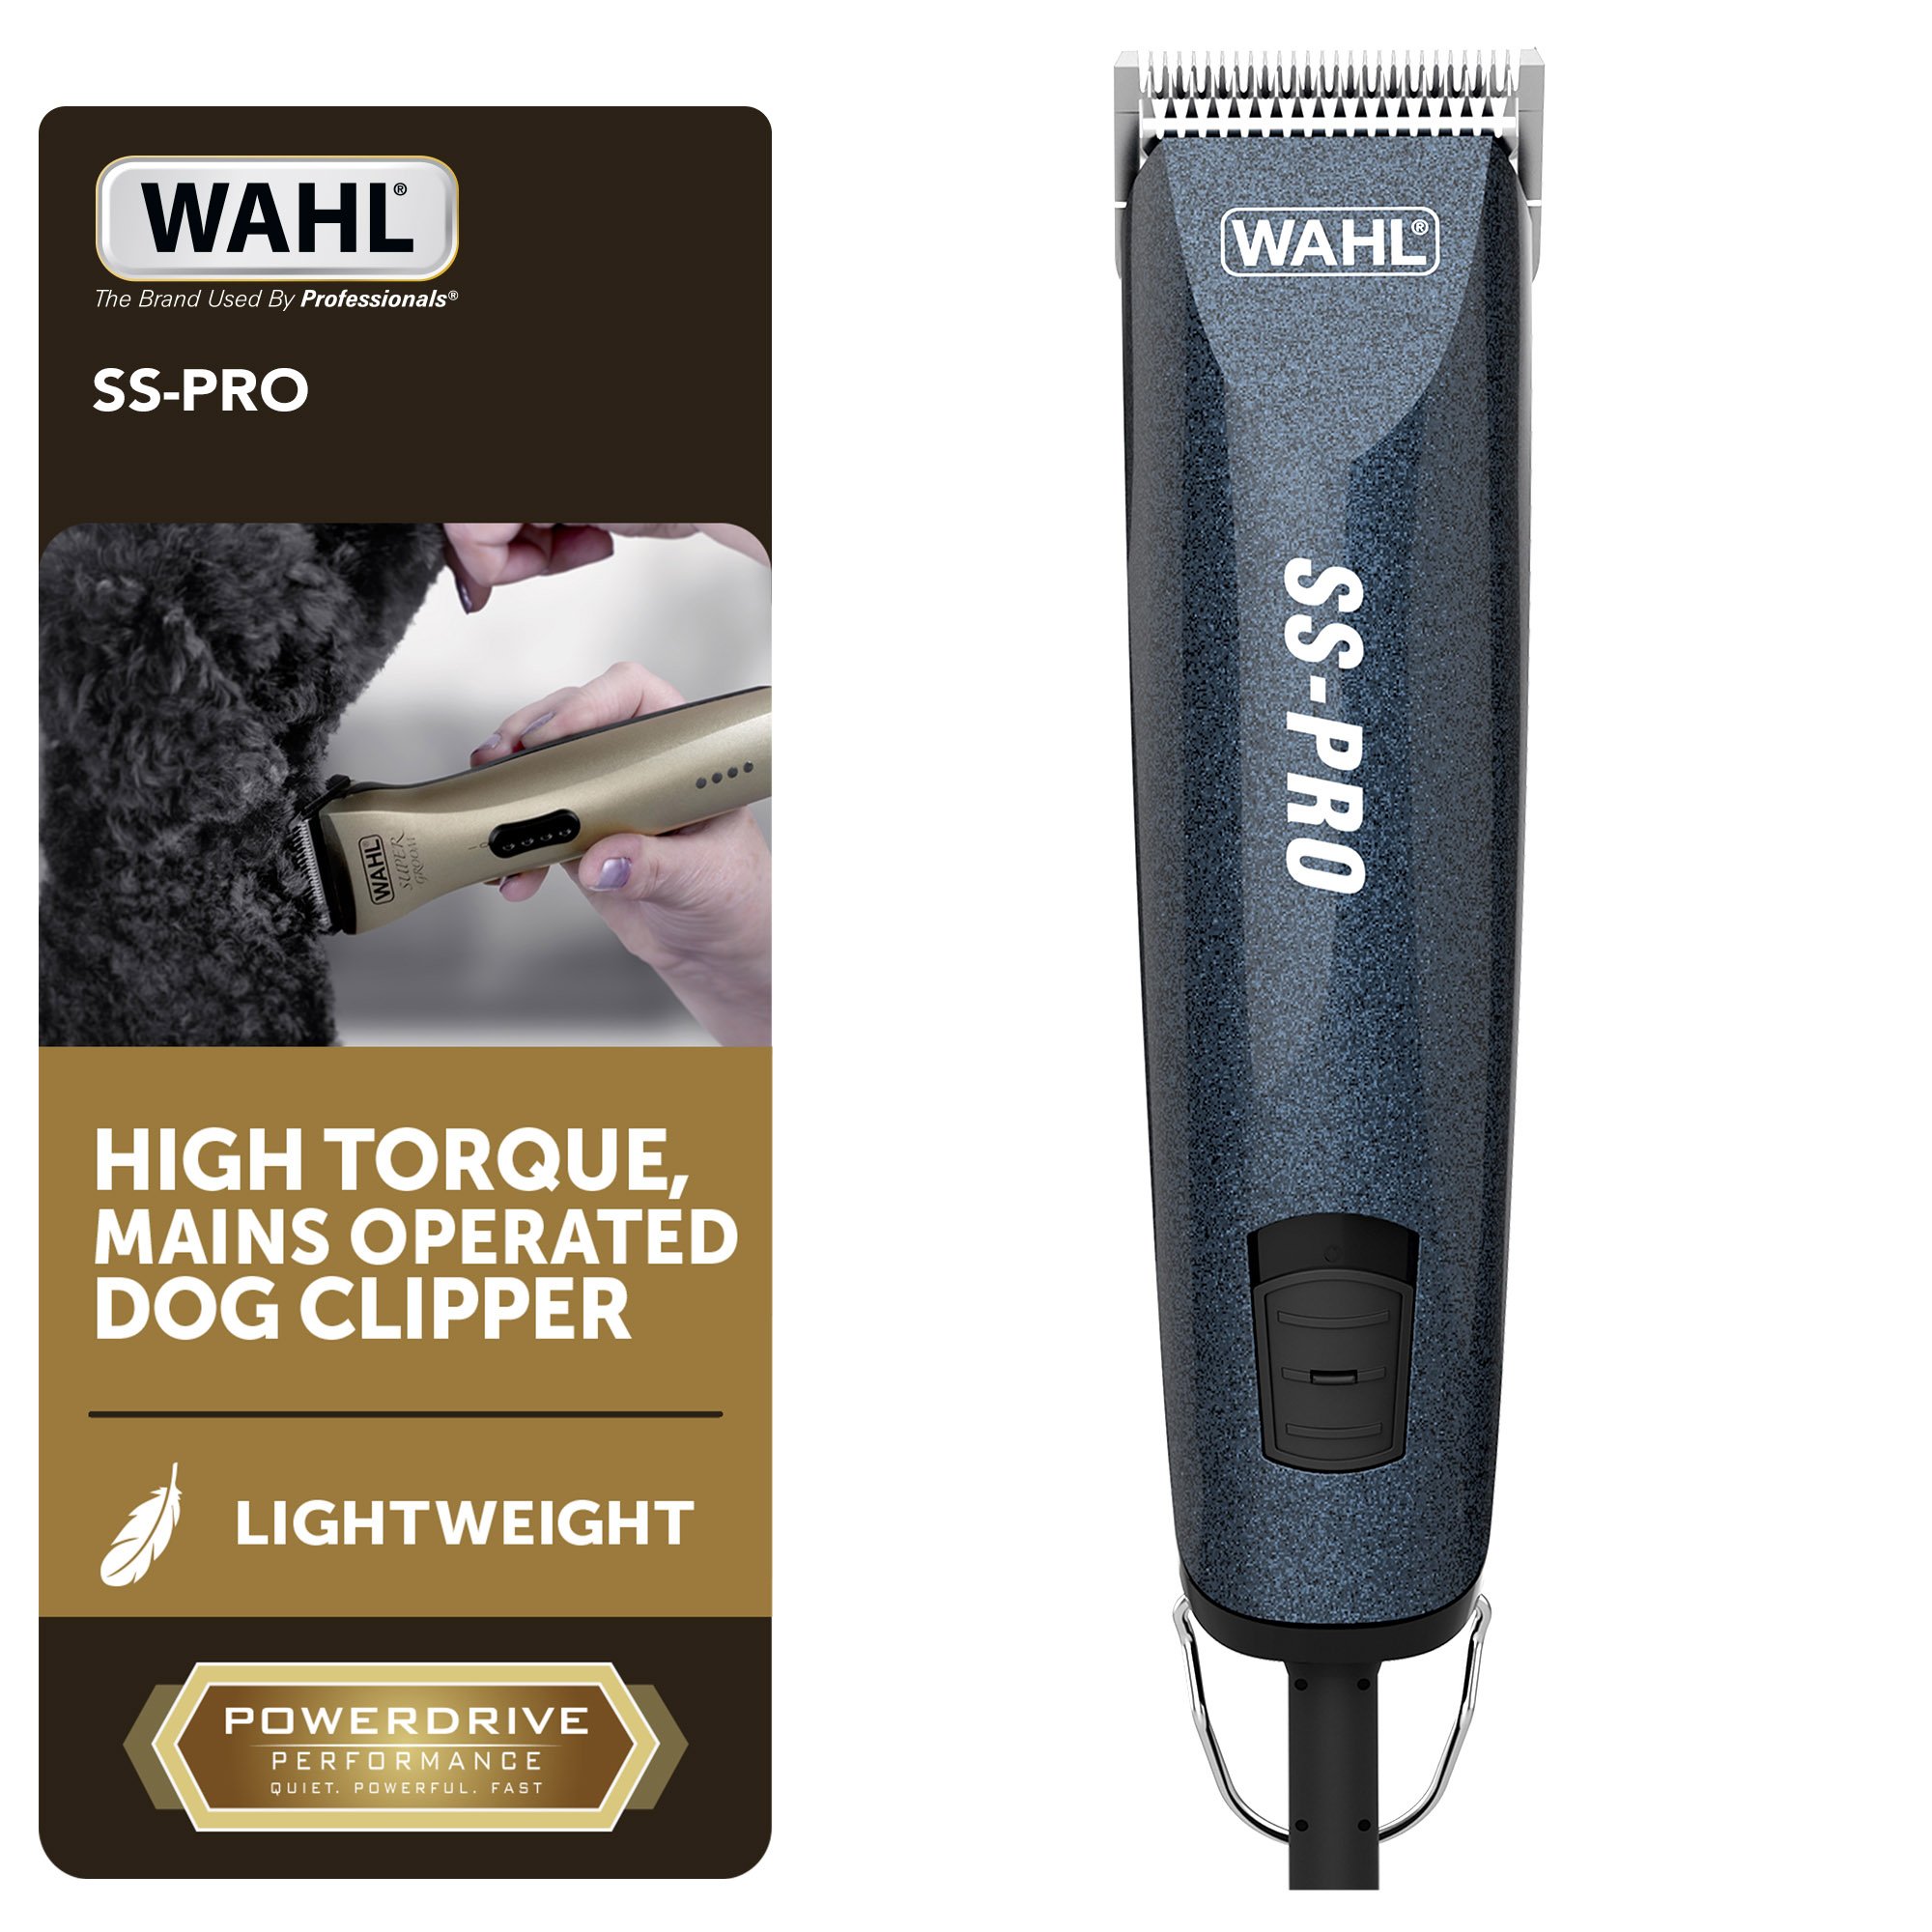 Wahl SS-Pro Premium Corded Dog Clipper Kit